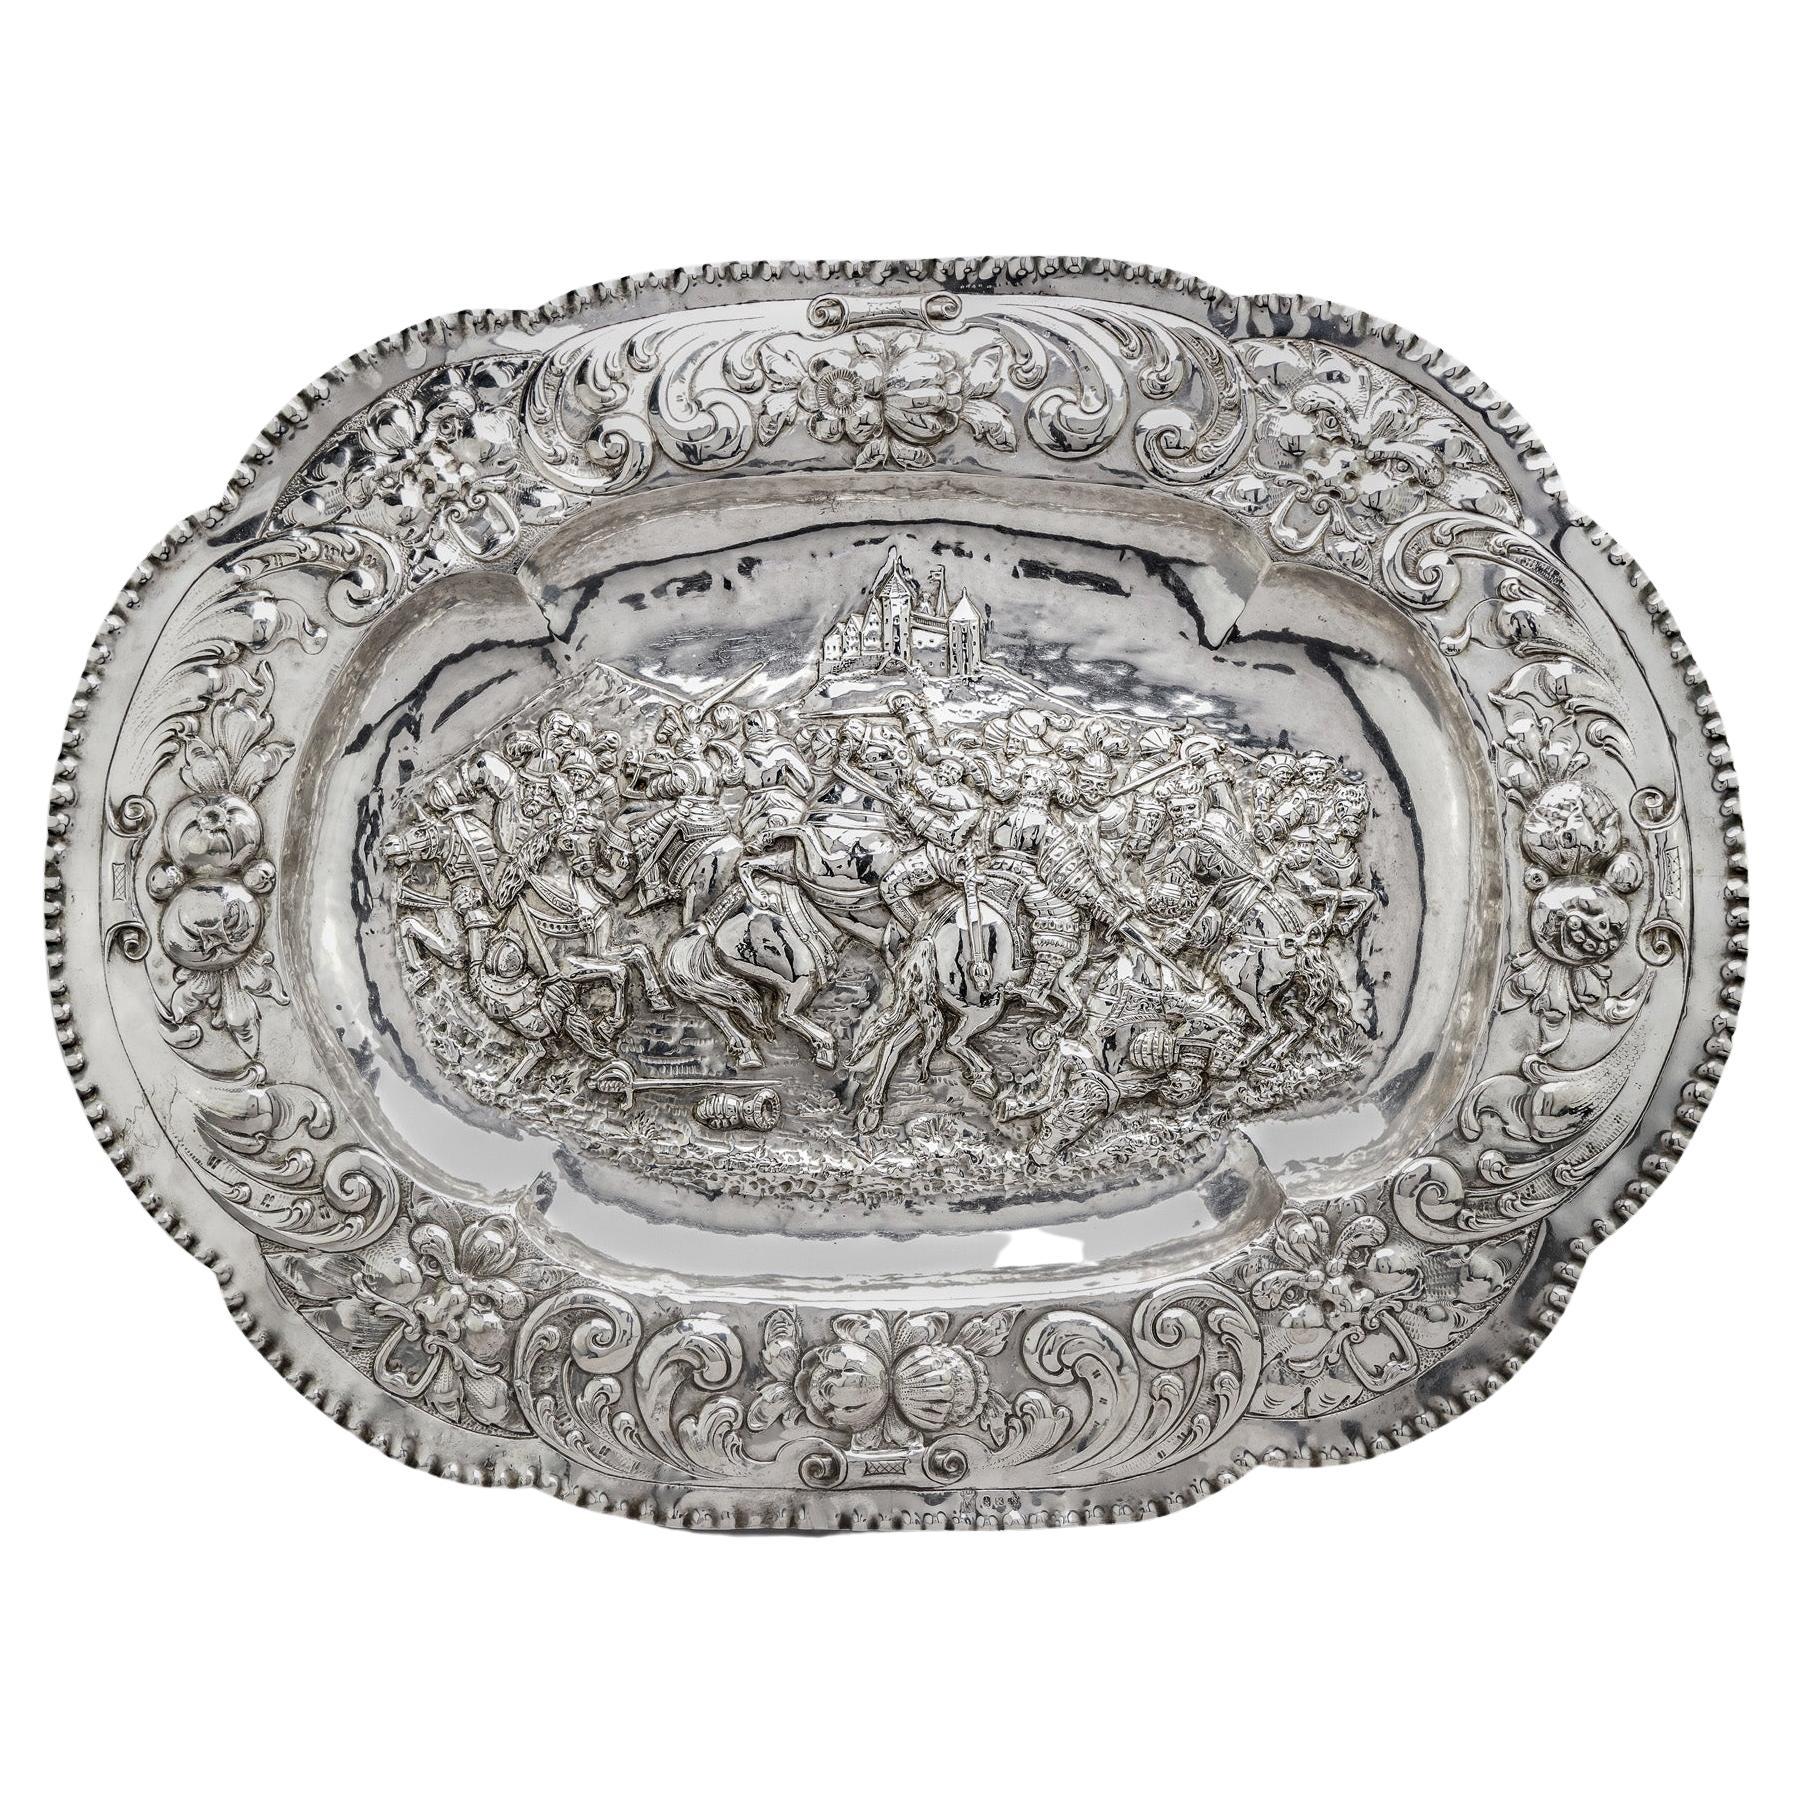 19th Century Hanau 800. Silver Large Charger Plate/Sideboard Dish